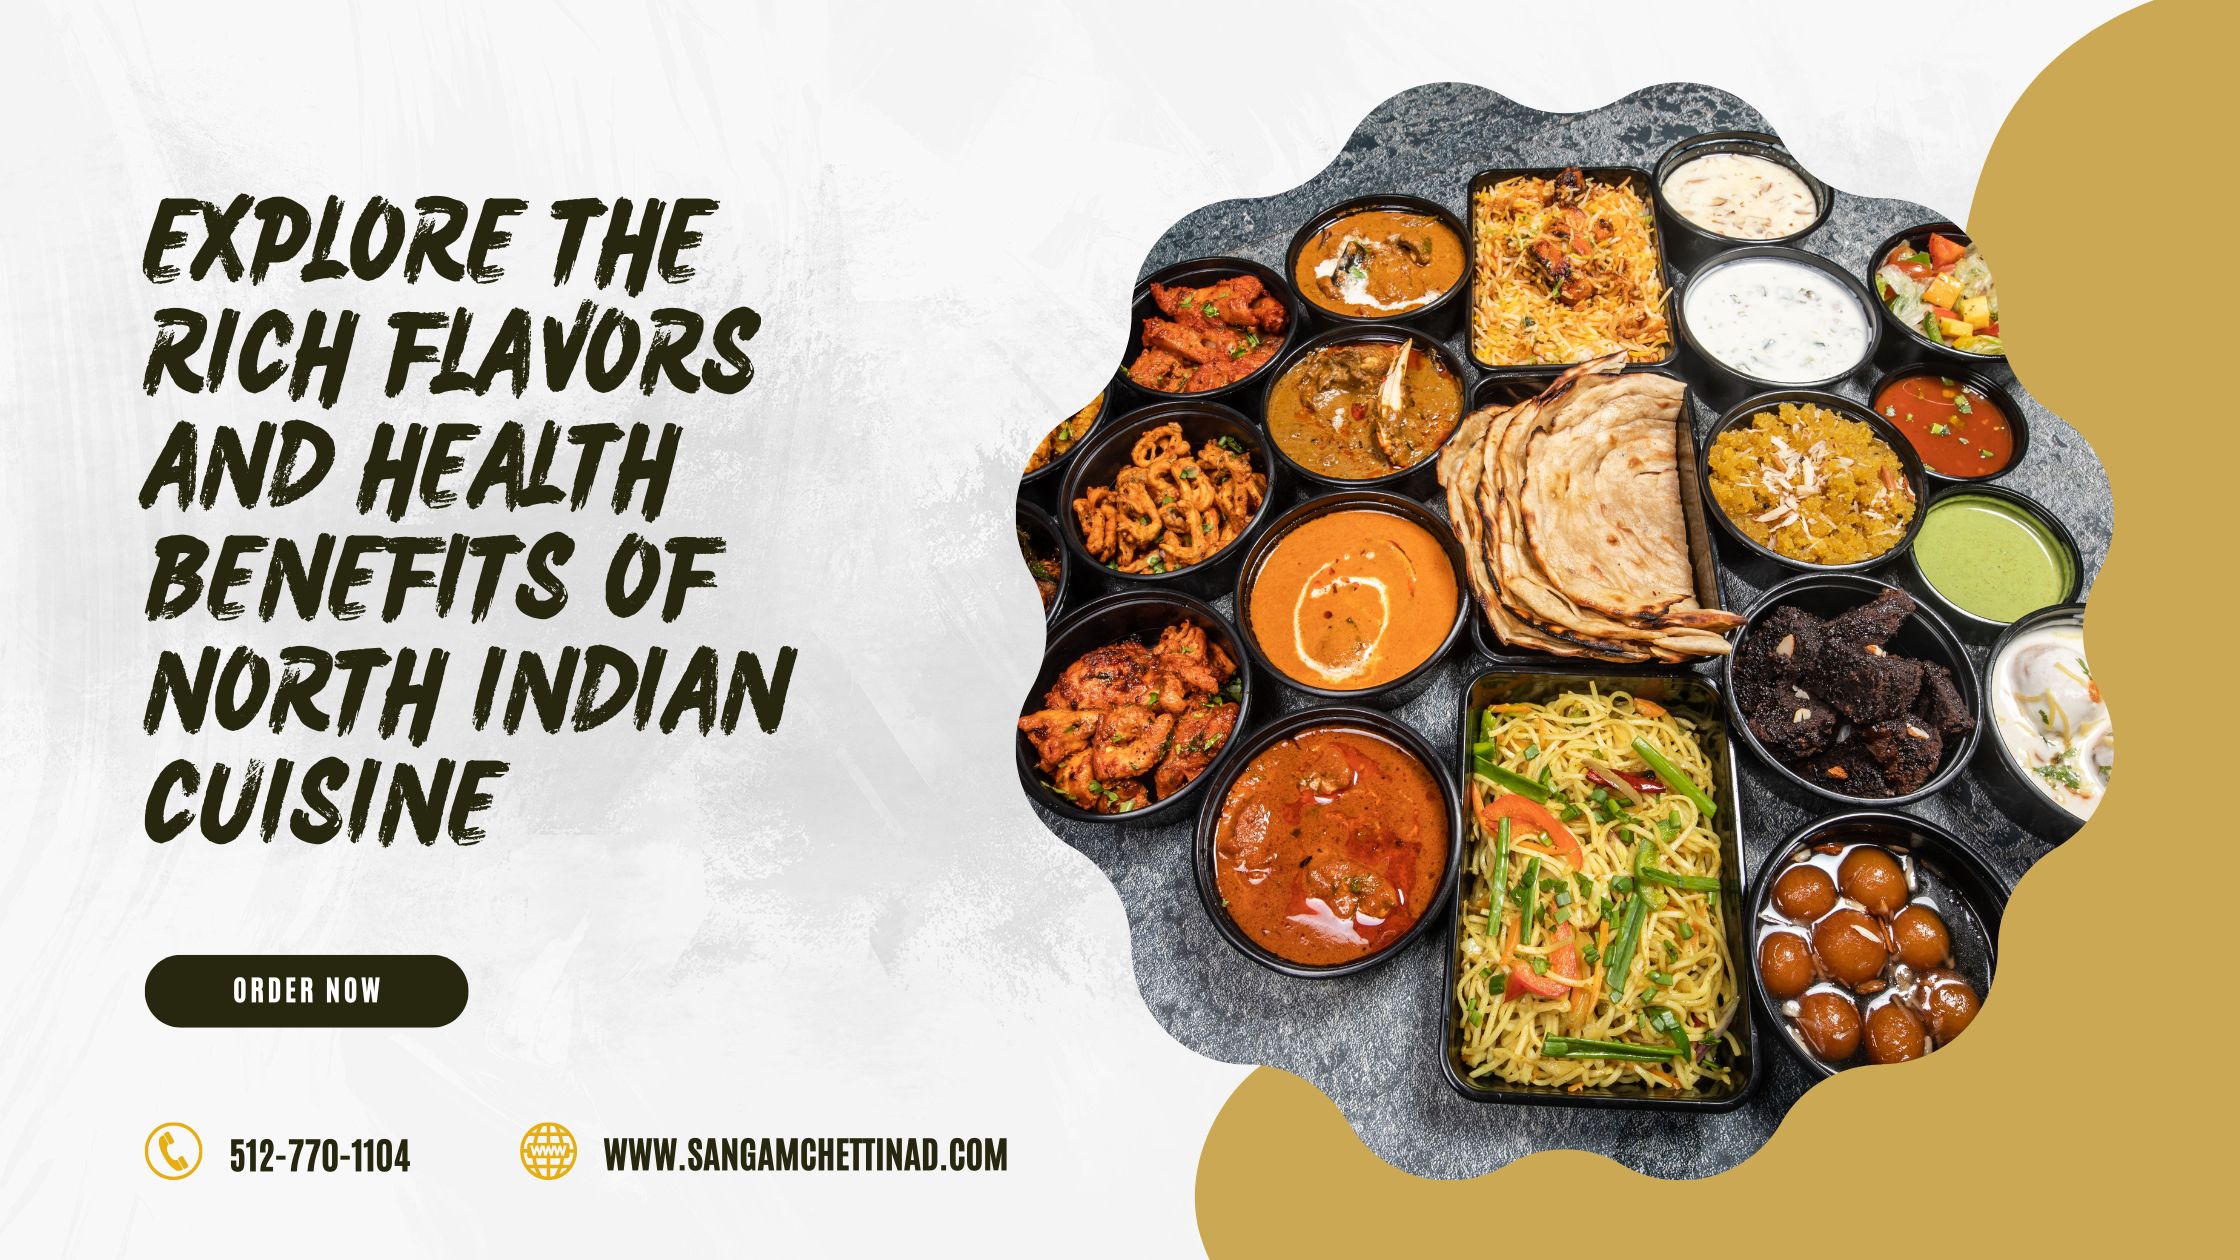 Explore the Rich Flavors and Health Benefits of North Indian Cuisine